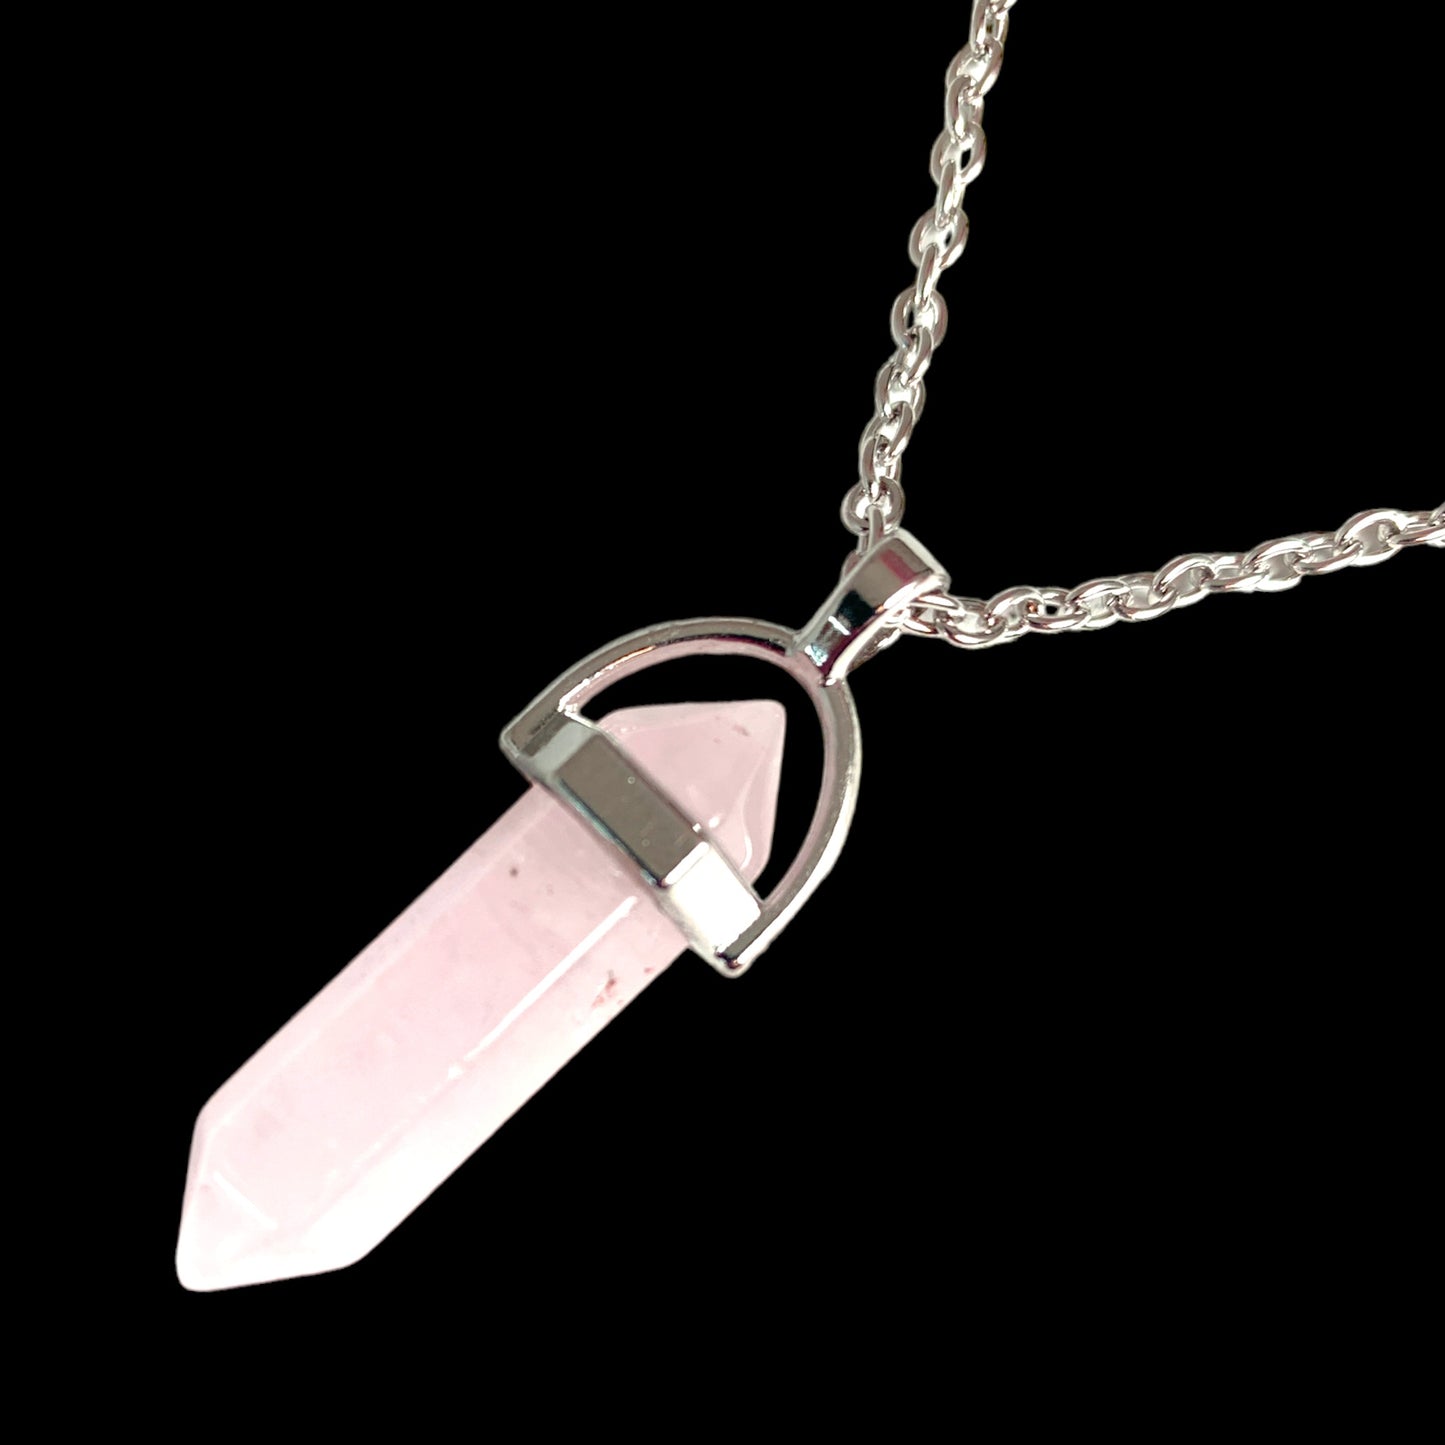 Rose Quartz Double Terminated Pendulum Stone Pendant 13x35mm with 18 Inch Chain 2 lnch Extender Chain - China - NEW922